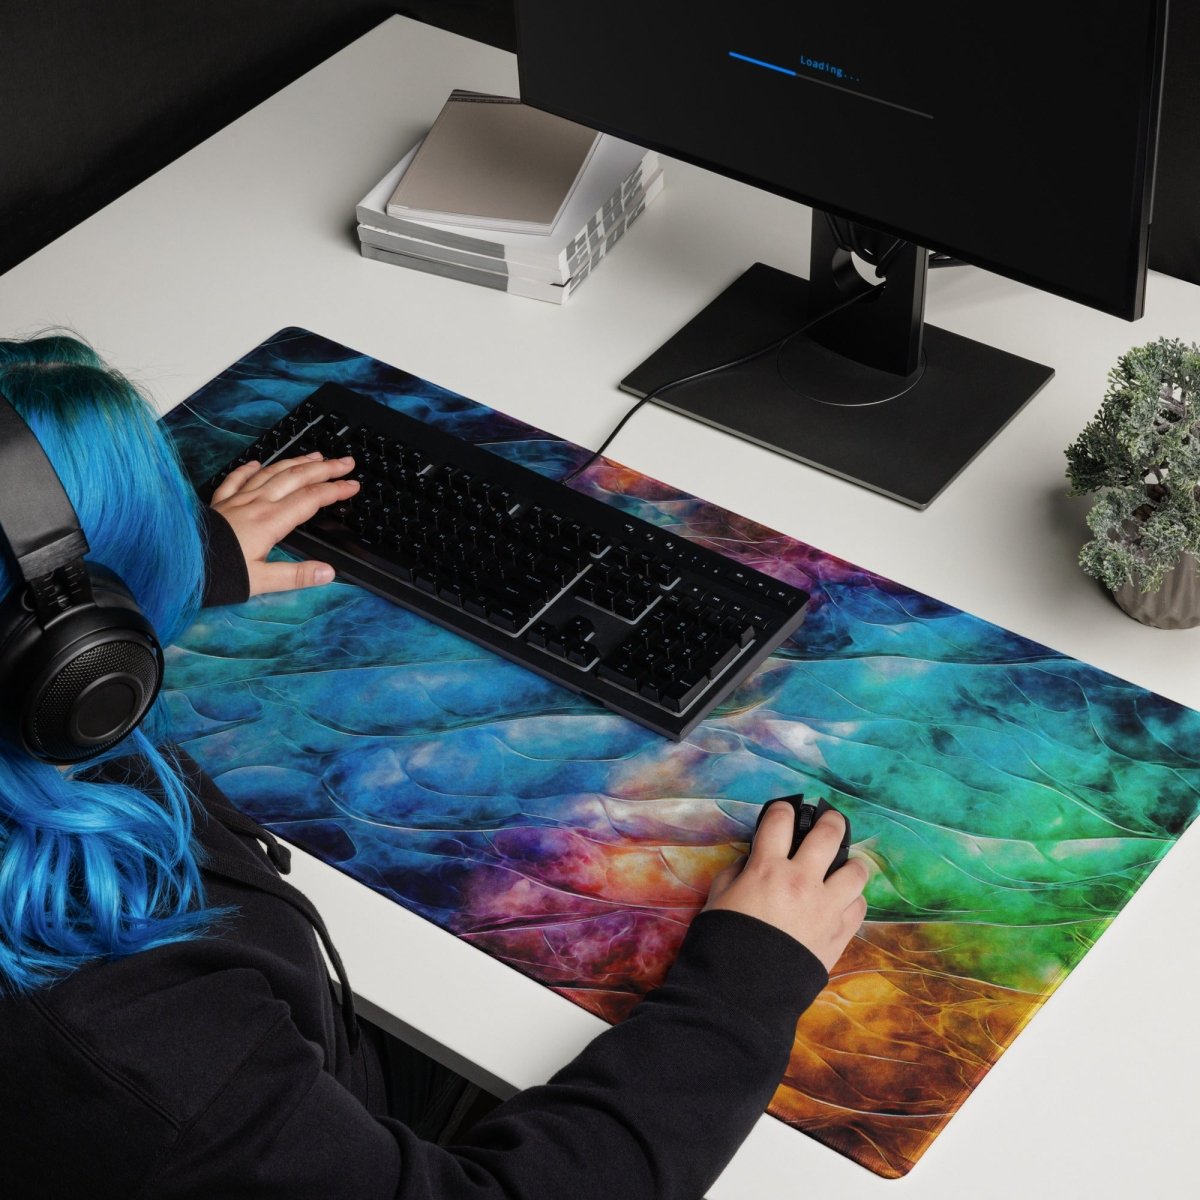 Hue waves mix - Gaming mouse pad - Ever colorful